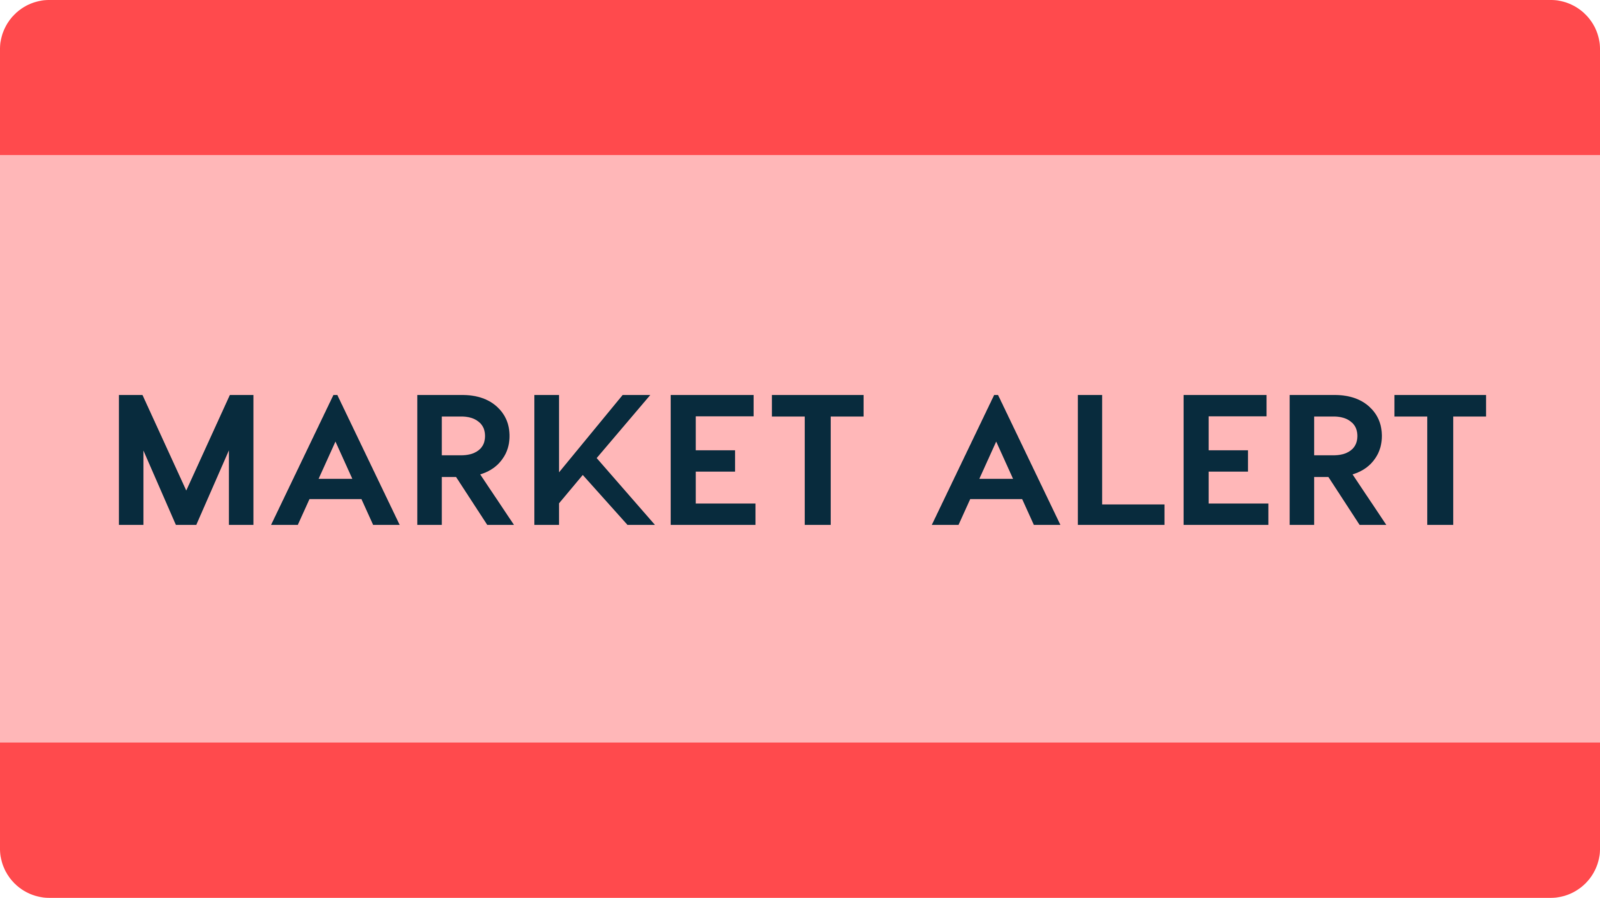 coral and pink background saying market alert